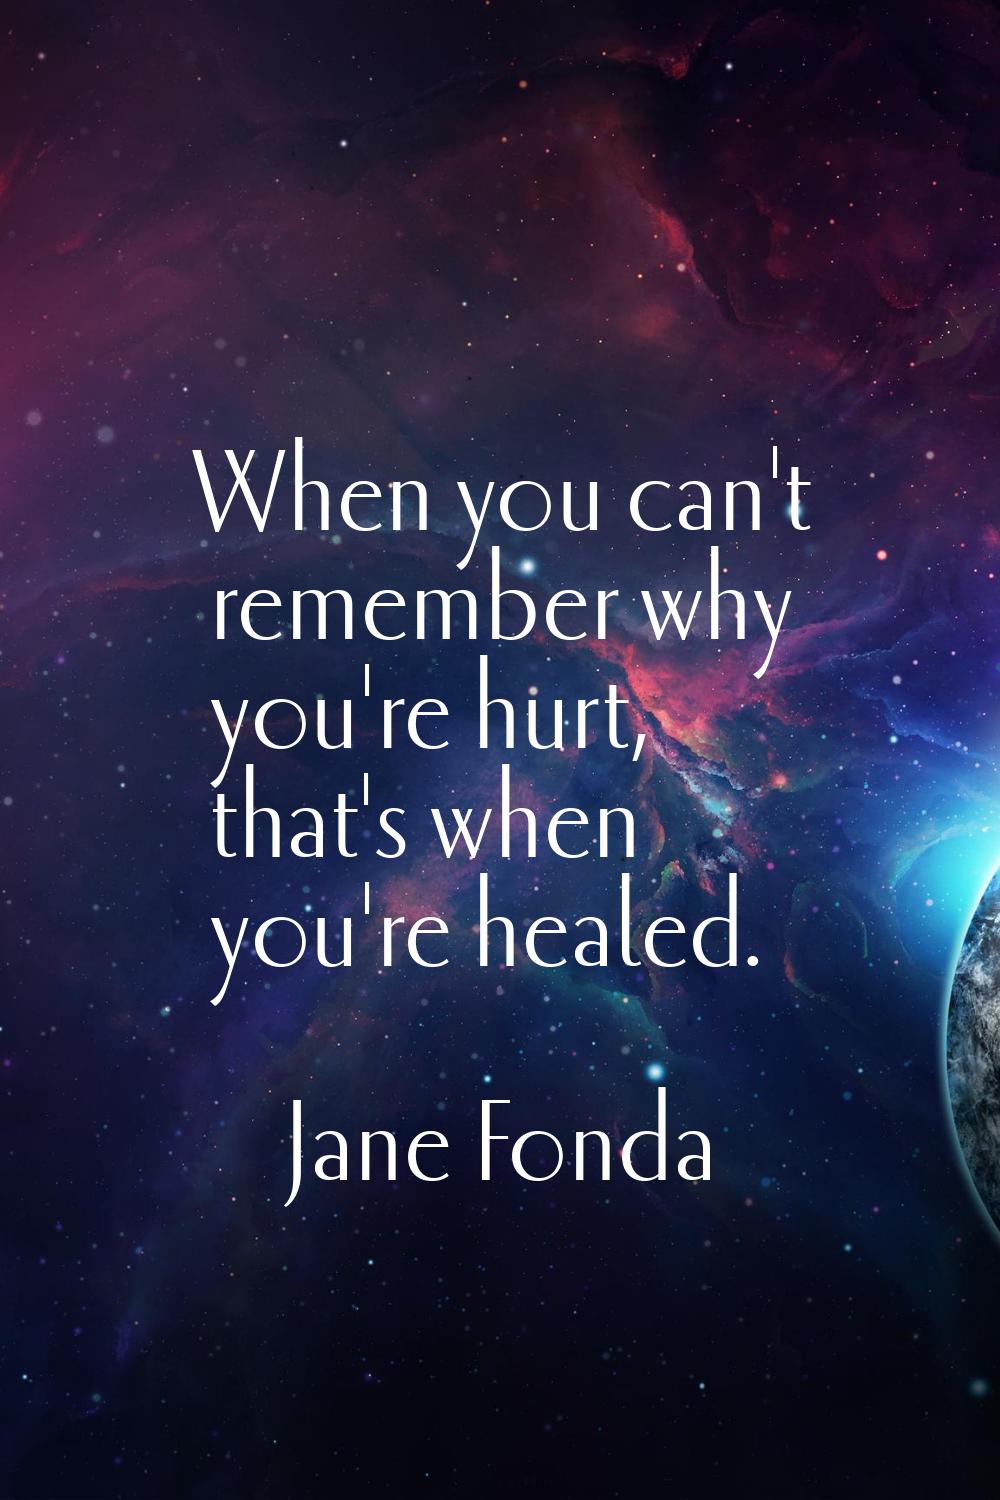 When you can't remember why you're hurt, that's when you're healed.